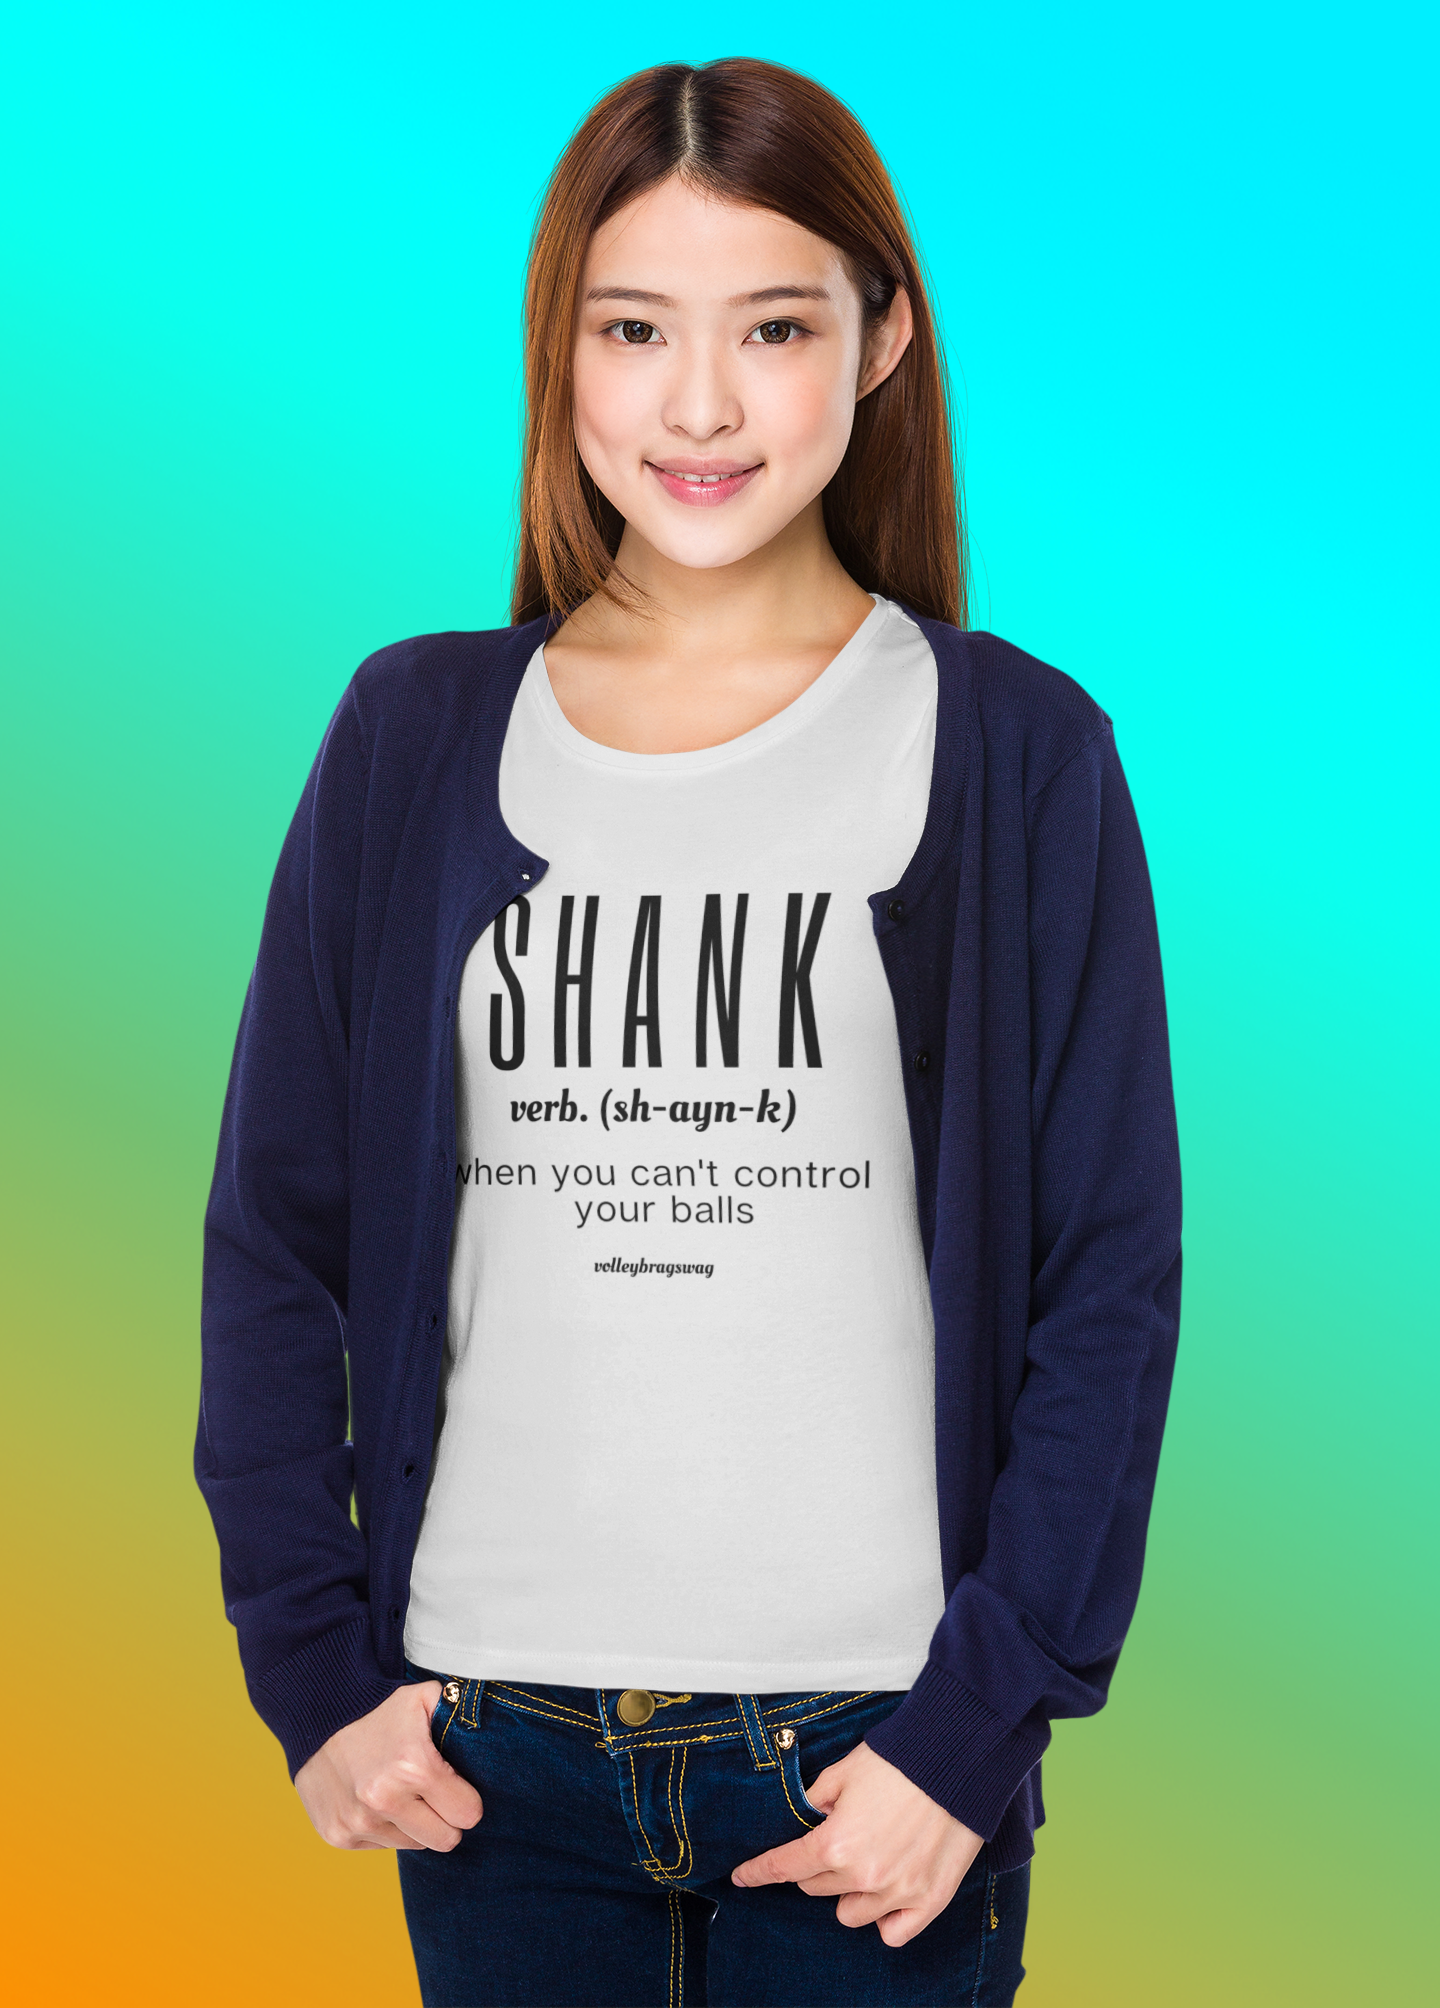 Shank - when you cant control your balls volleyball shirt. April Chapple, Launches a Hilarious Volleyball T-shirt Line With Fun Tongue-in-Cheek Designs sure to make players and enthusiasts laugh available on Etsy and Amazon in time for Cyber Monday and Christmas. A shank is actually a digging or passing error so its something you do not want to do in defense or serve receive. You shank a ball when you contact it while passing or digging in a way that no one can make a play out of the ball because it goes out of bounds or hits the floor.